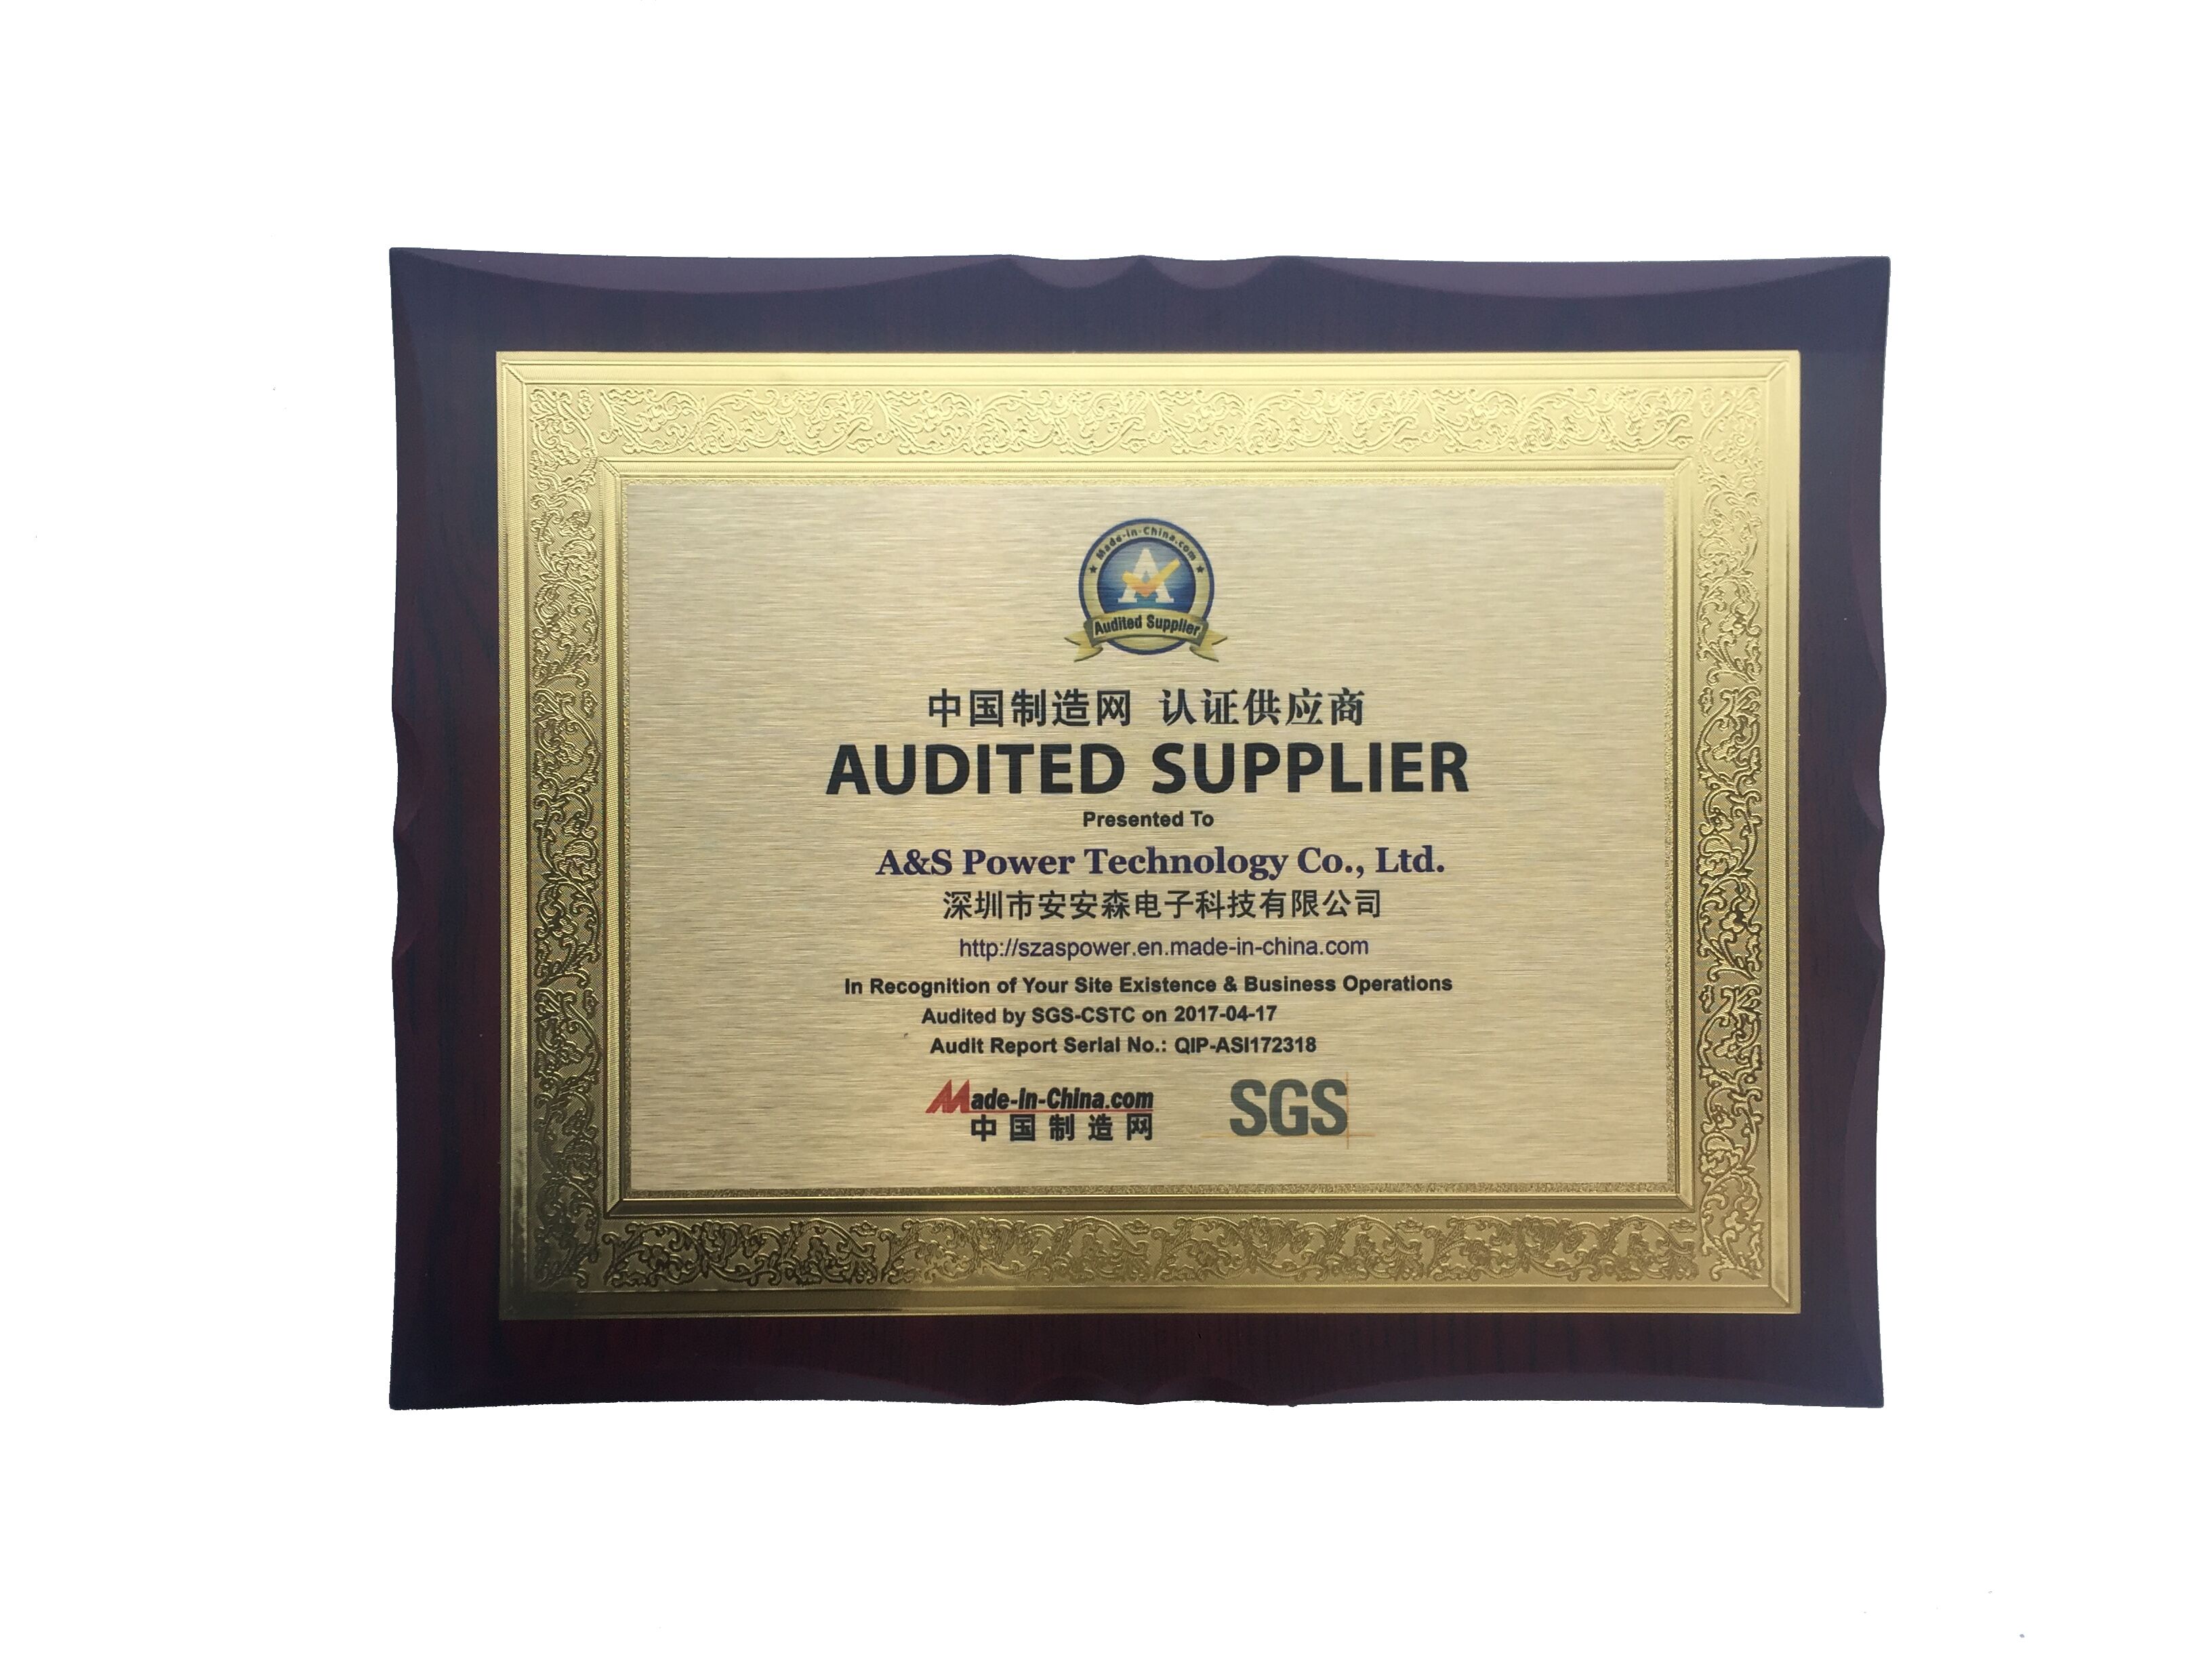 A&S Power made in china audited supplier